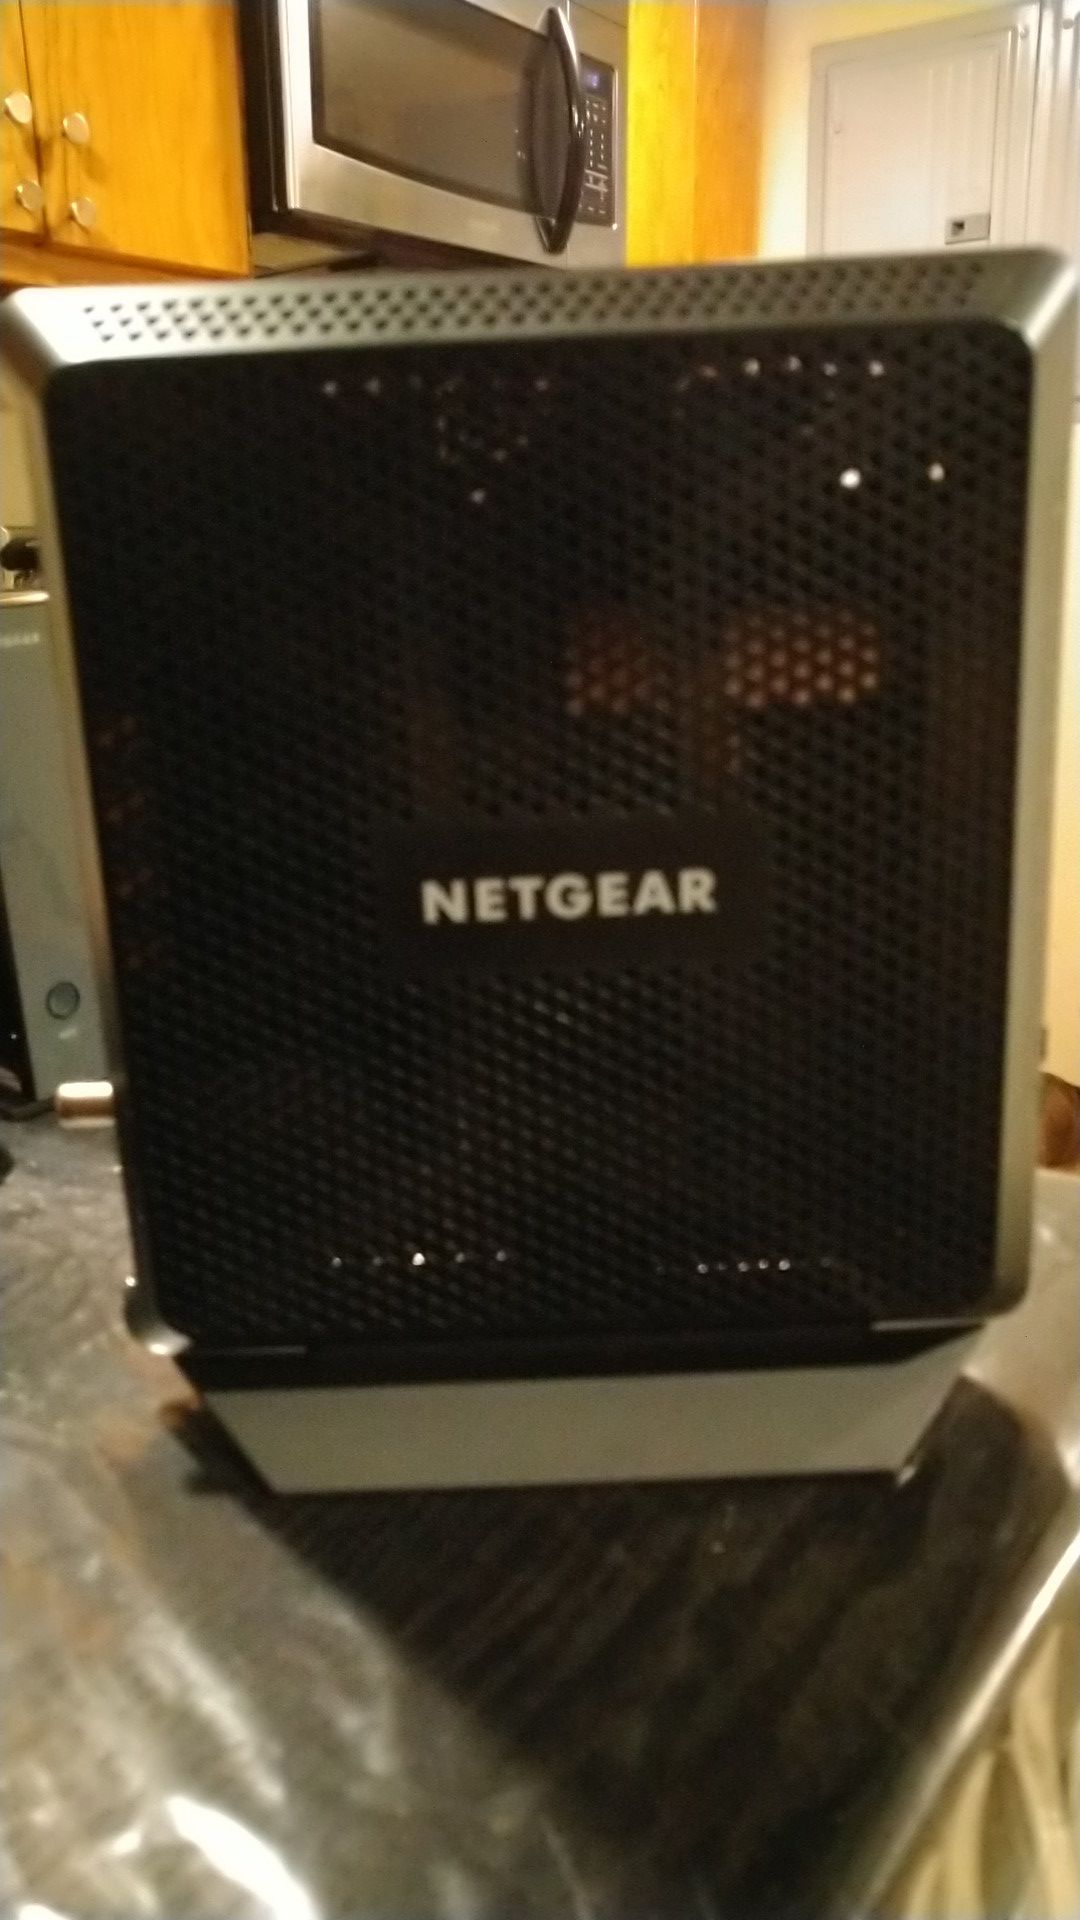 Netgear router plus modem all in one